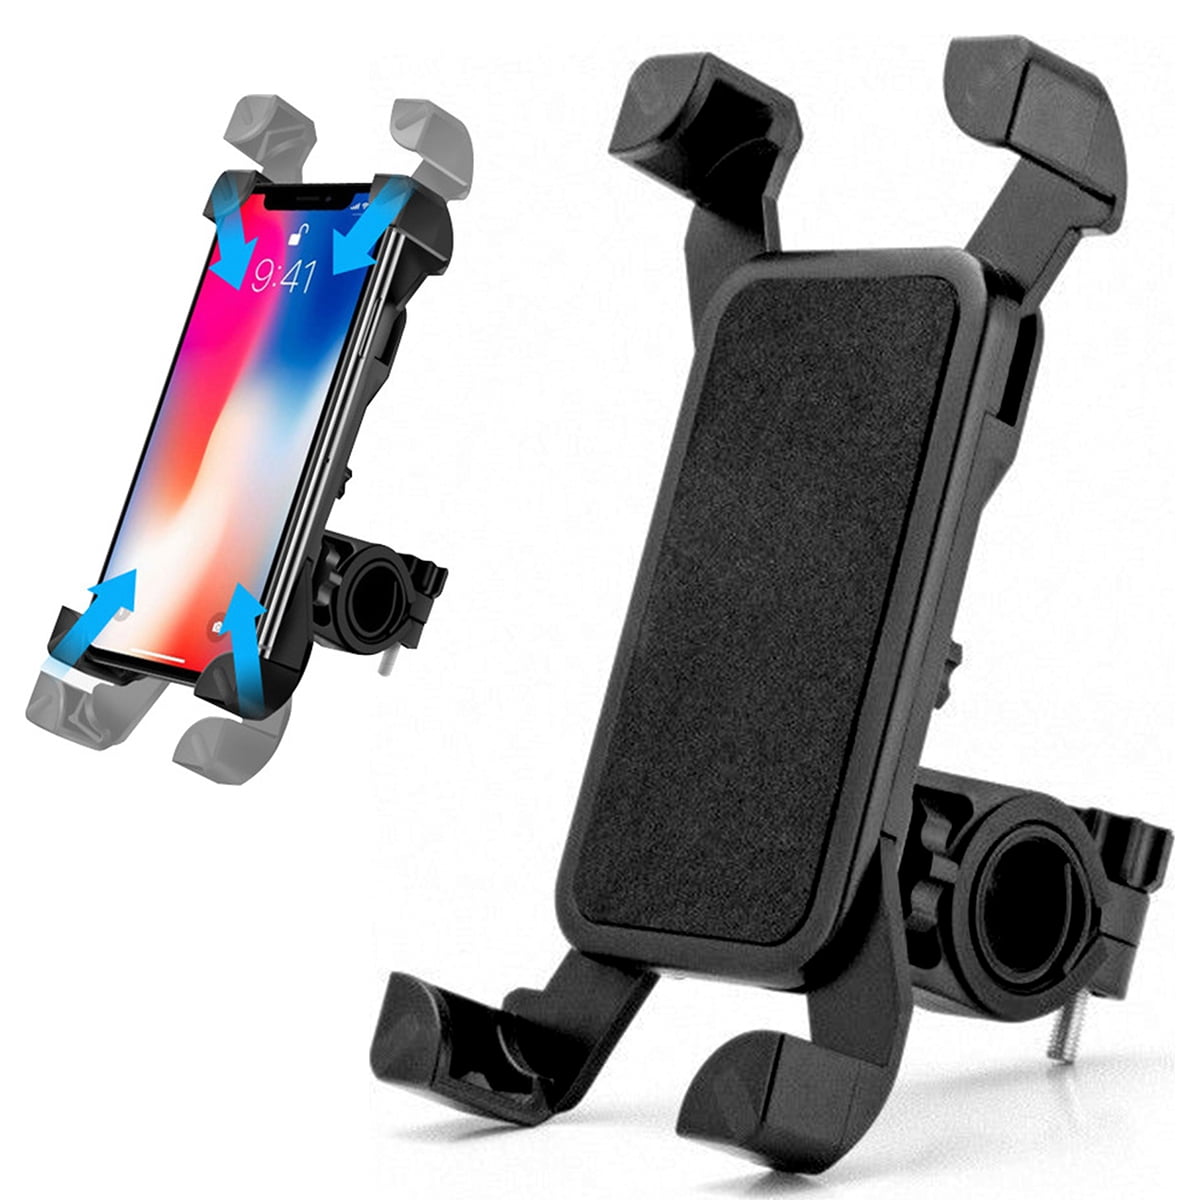 UBeesize Phone Holder for Bike Handlebar, Magnetic Motor Phone Mount Double-Safe Cell Phone Holder for iPhone Samsung Galaxy Google with Strong